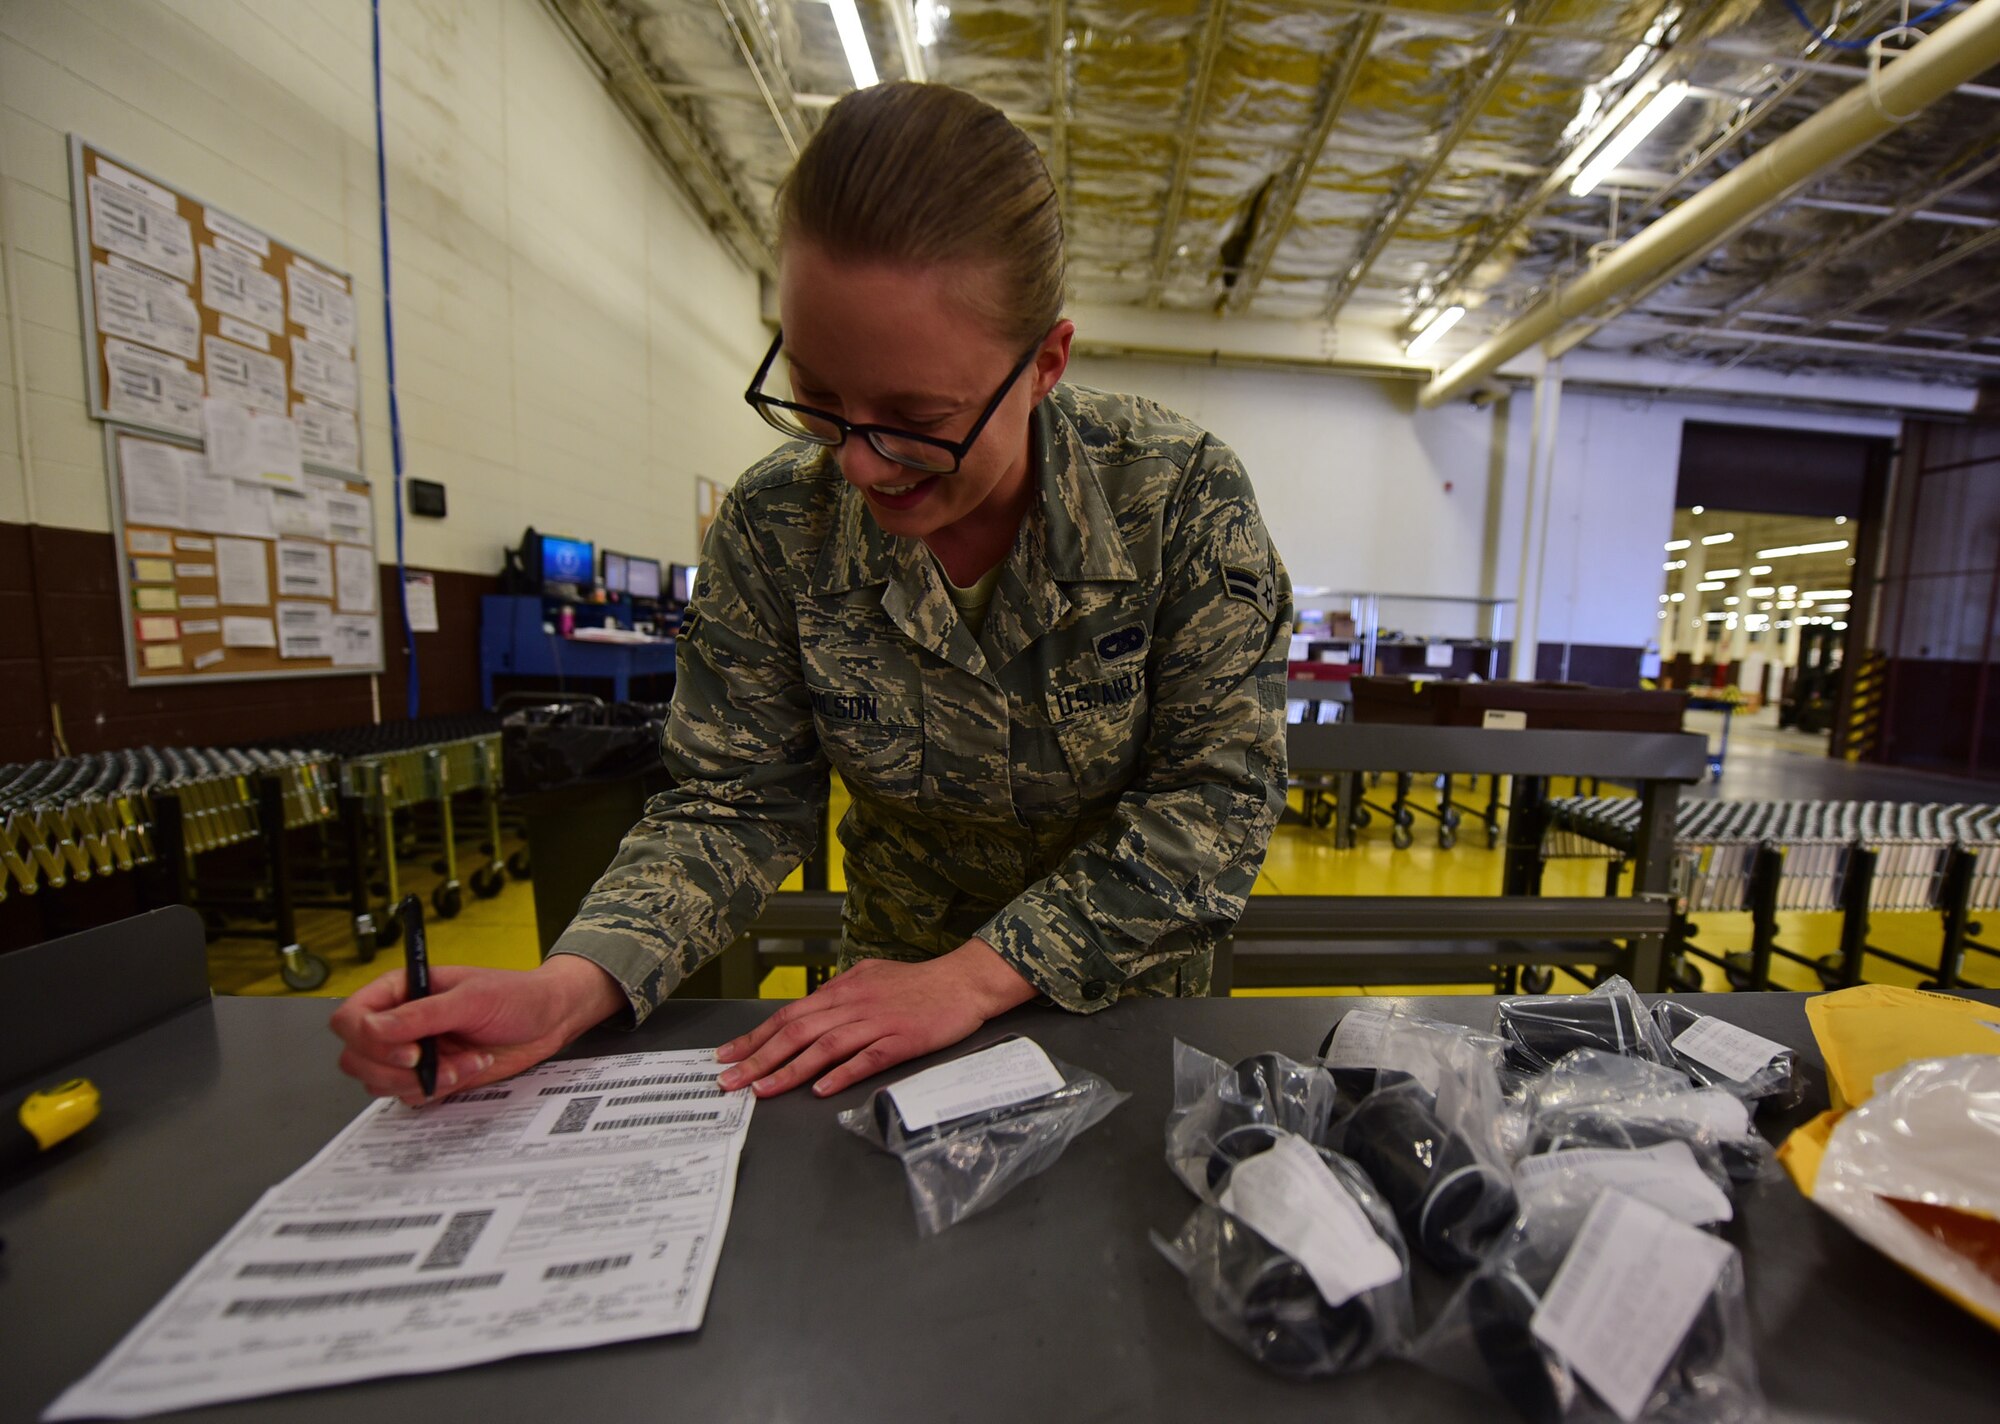 Airman 1st Class Justine Wilson, a traffic management journeyman assigned to the 28th Logistics Readiness Squadron, counts out the parts of a package received at Ellsworth Air Force Base, S.D., Nov. 8, 2016. Each part in a shipment must be accounted for to ensure the accuracy of the base inventory. (U.S. Air Force photo by Airman 1st Class James L. Miller) 